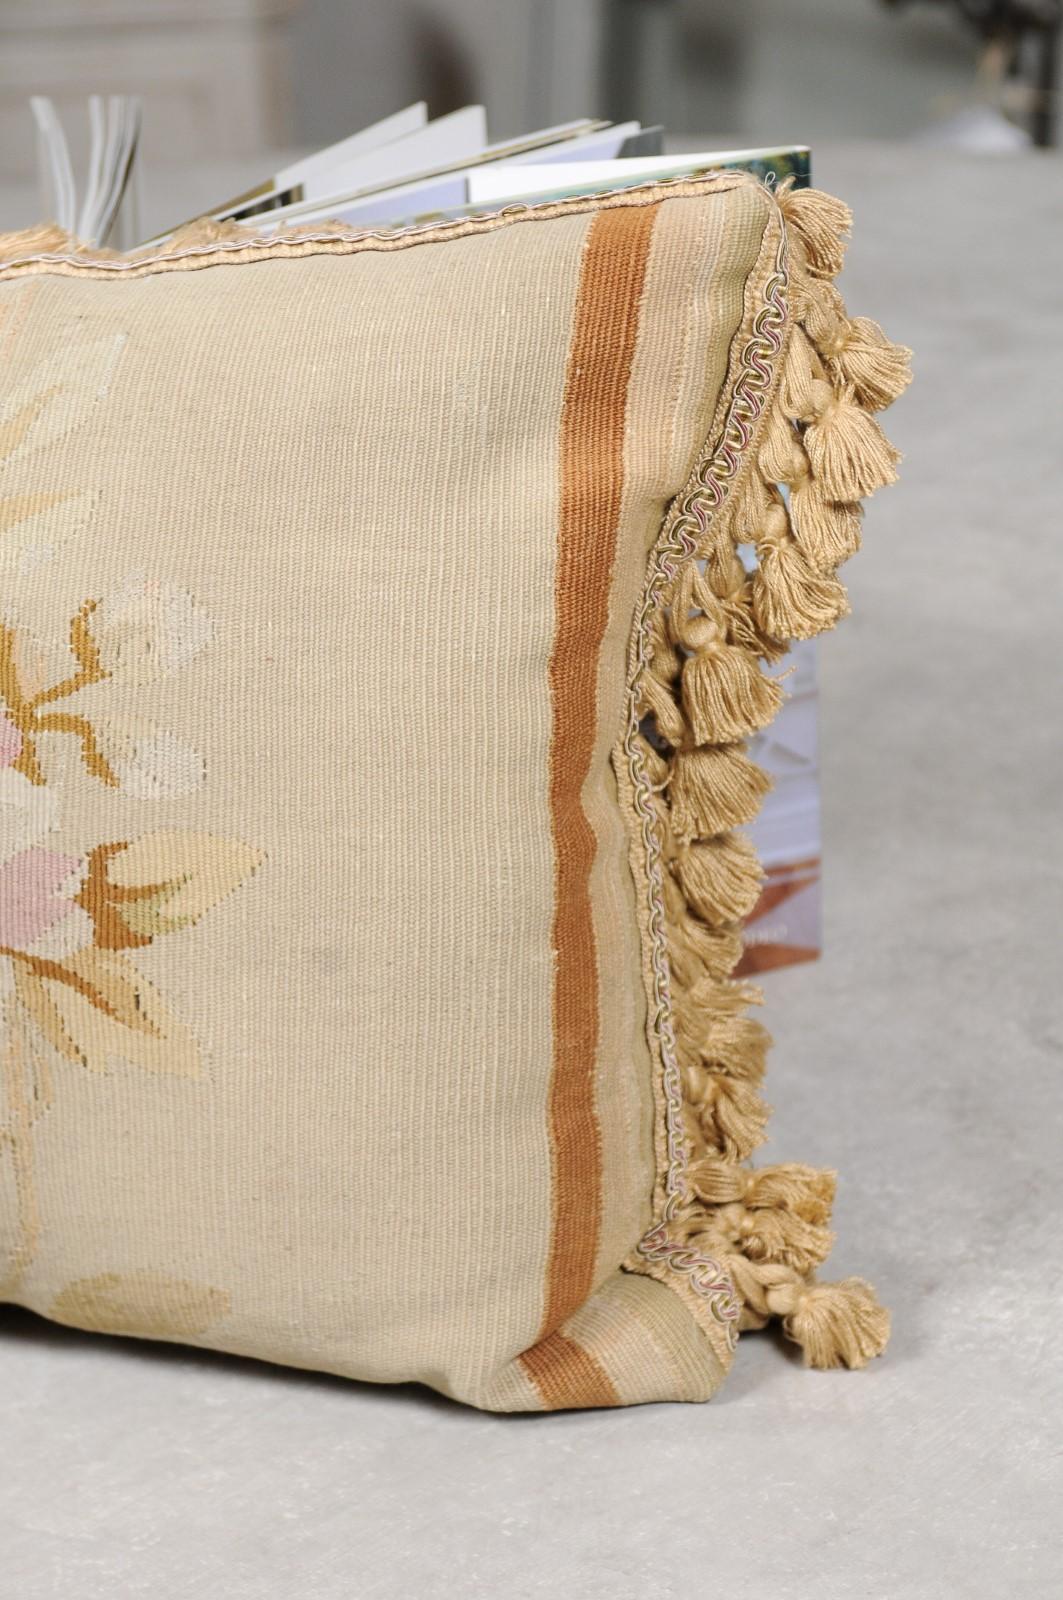 French 19th Century Aubusson Tapestry Pillow with Floral Decor and Tassels 2